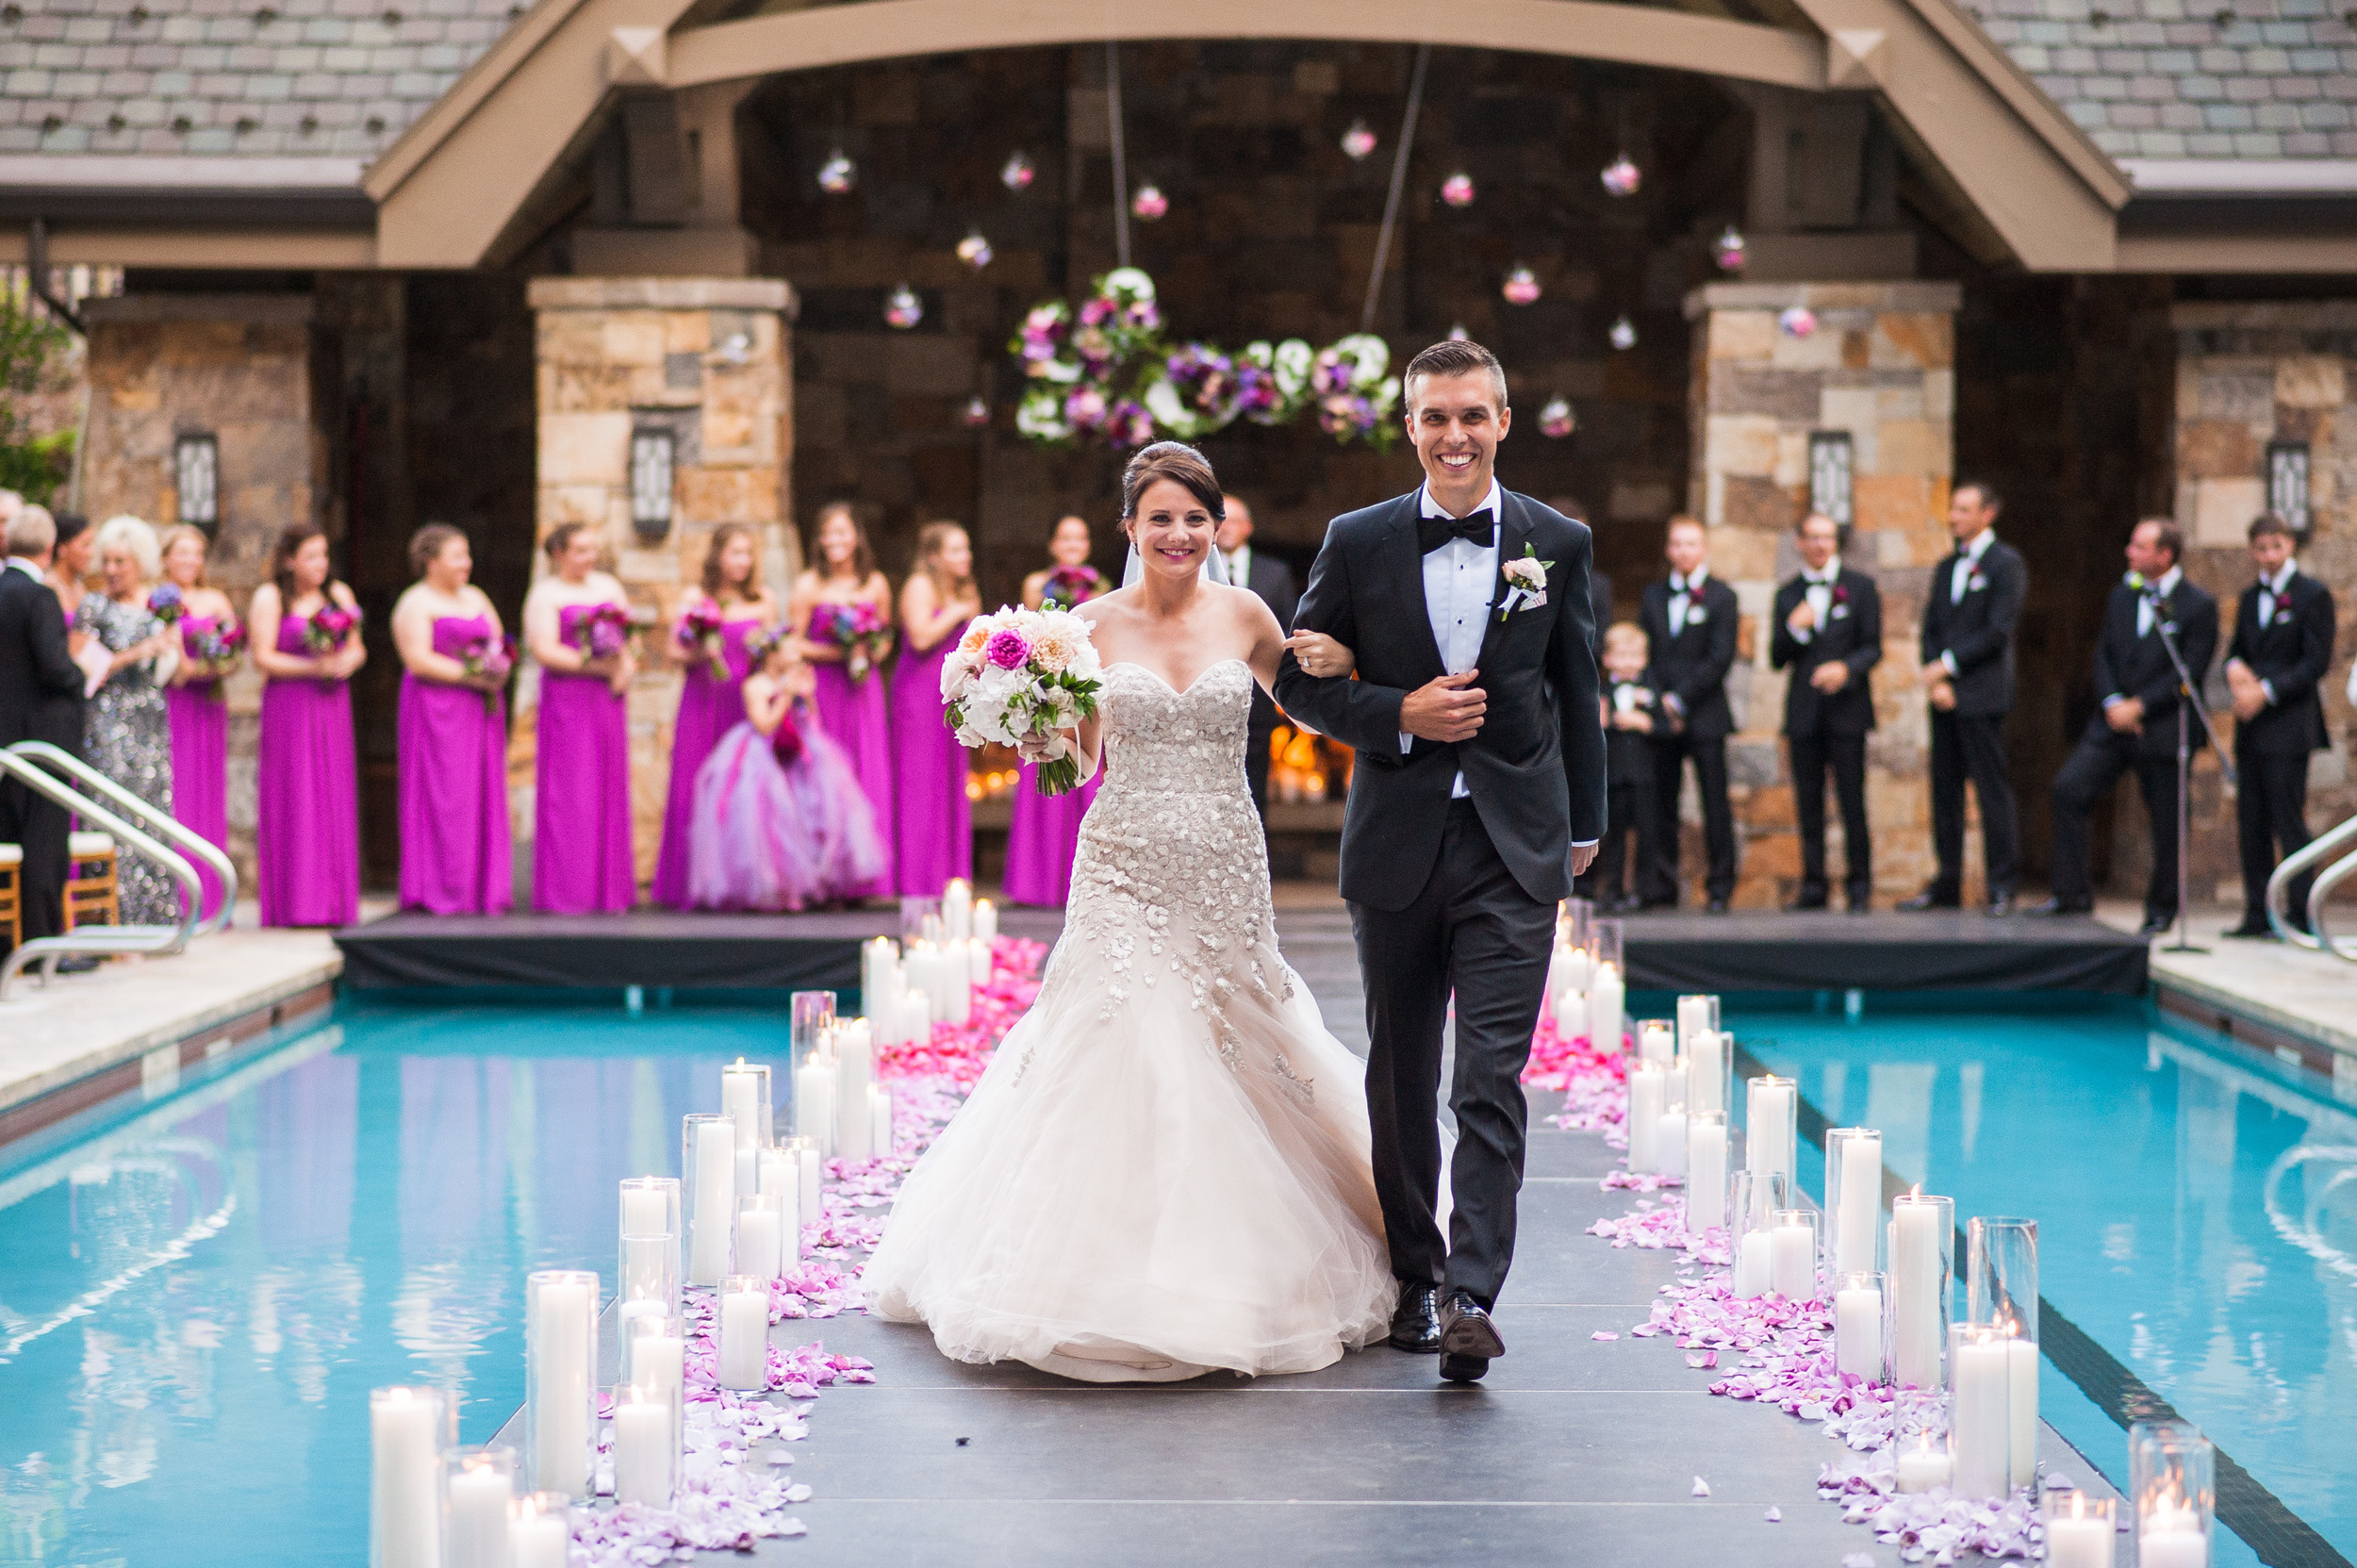  Jessica + Derek's wedding at the Four Seasons Vail | Gown by Liancarlo from Little White Dress Bridal Shop in Denver | Doug Treiber Photography 